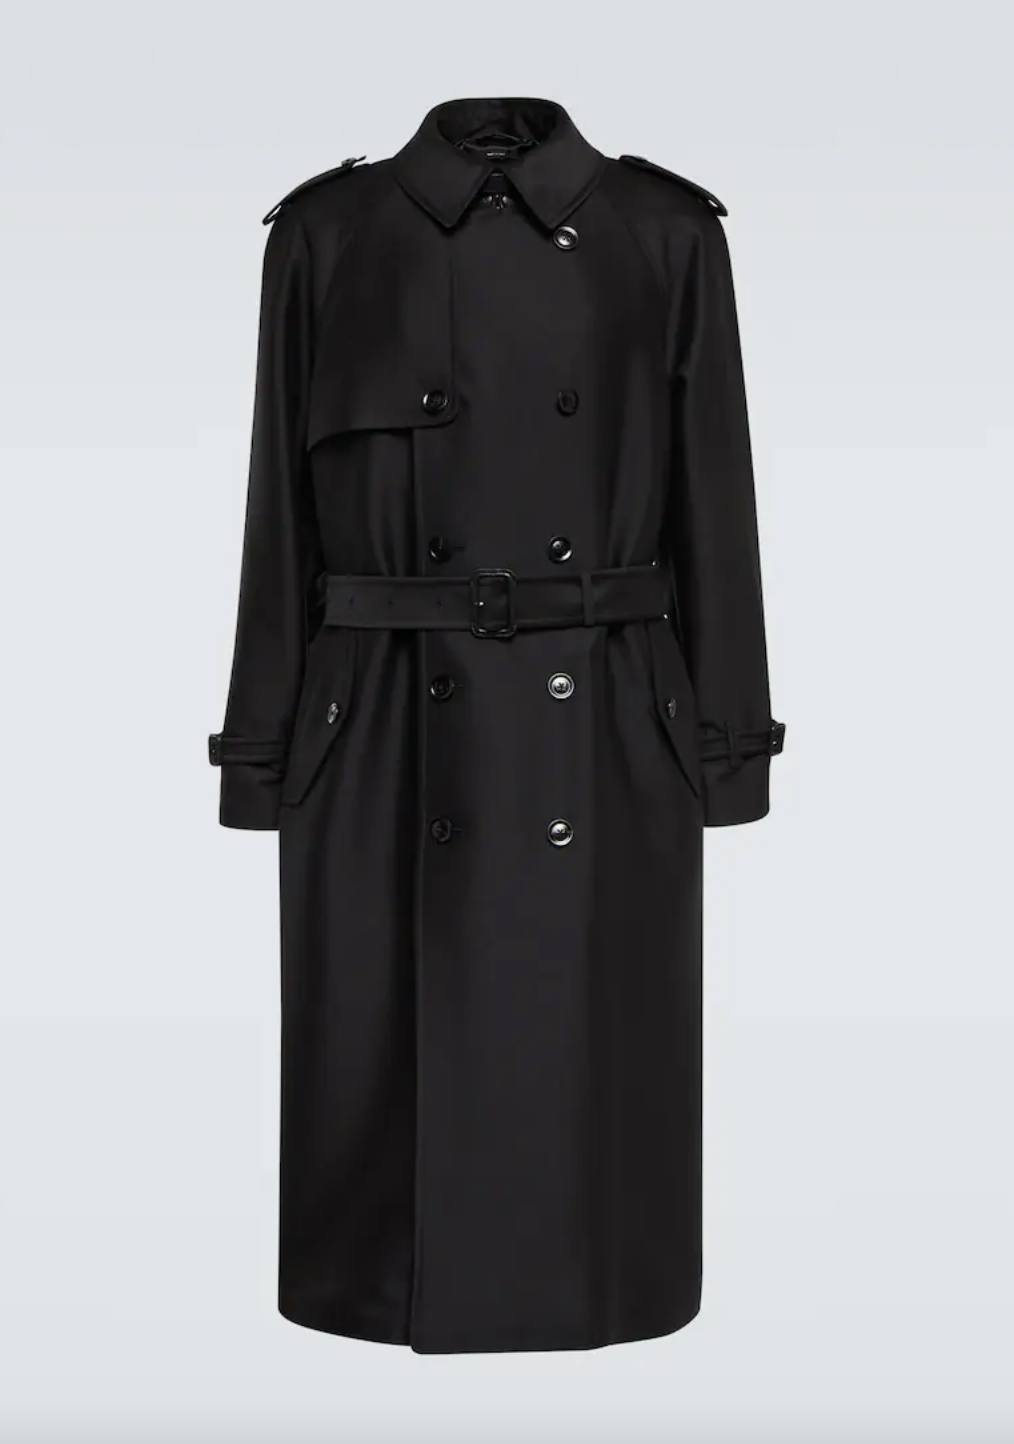 Tom Ford raincoats and trench coats for men